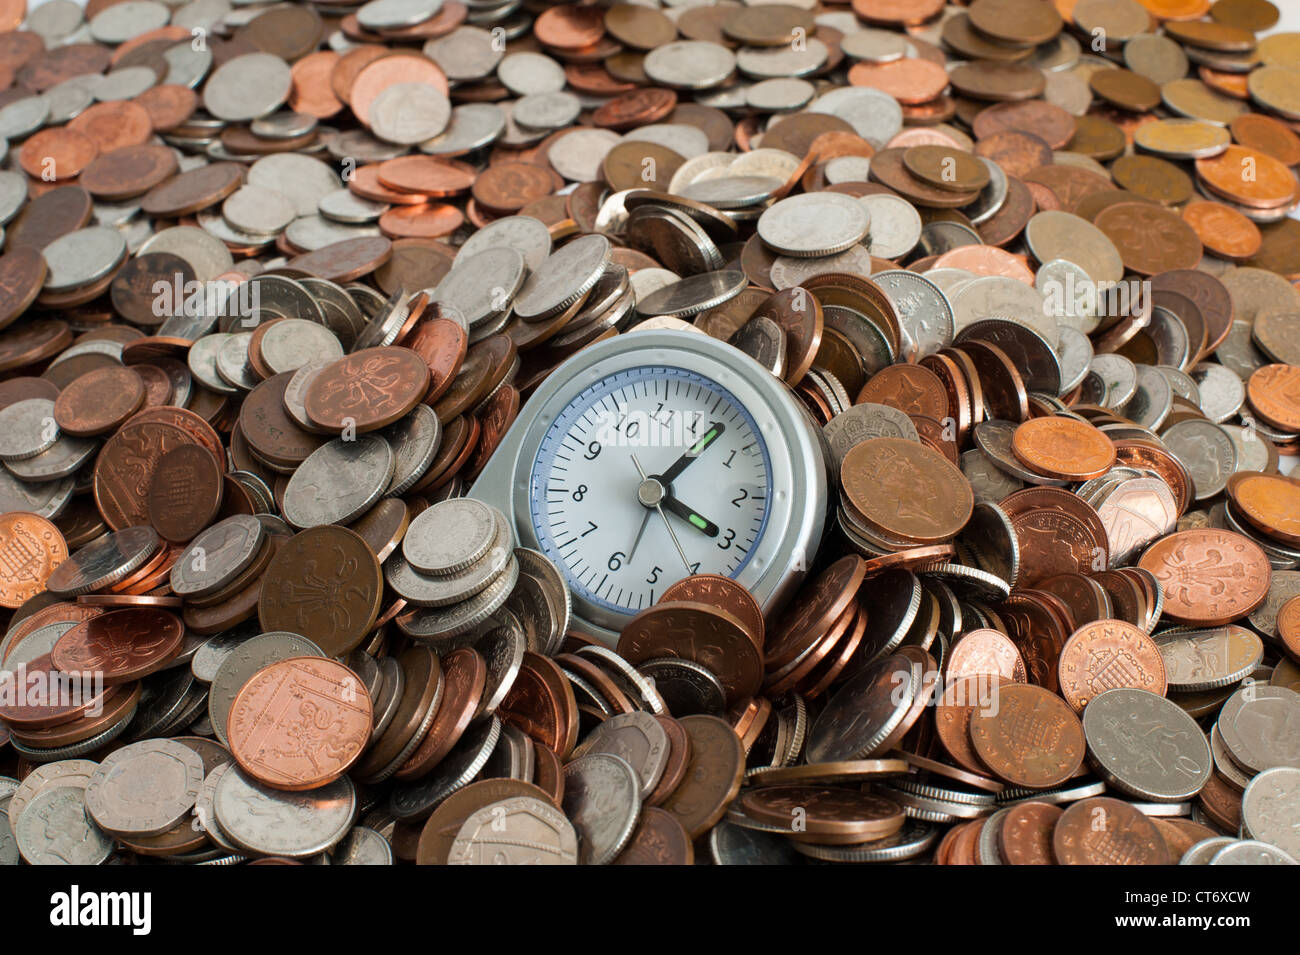 Clock in a pile of money Stock Photo